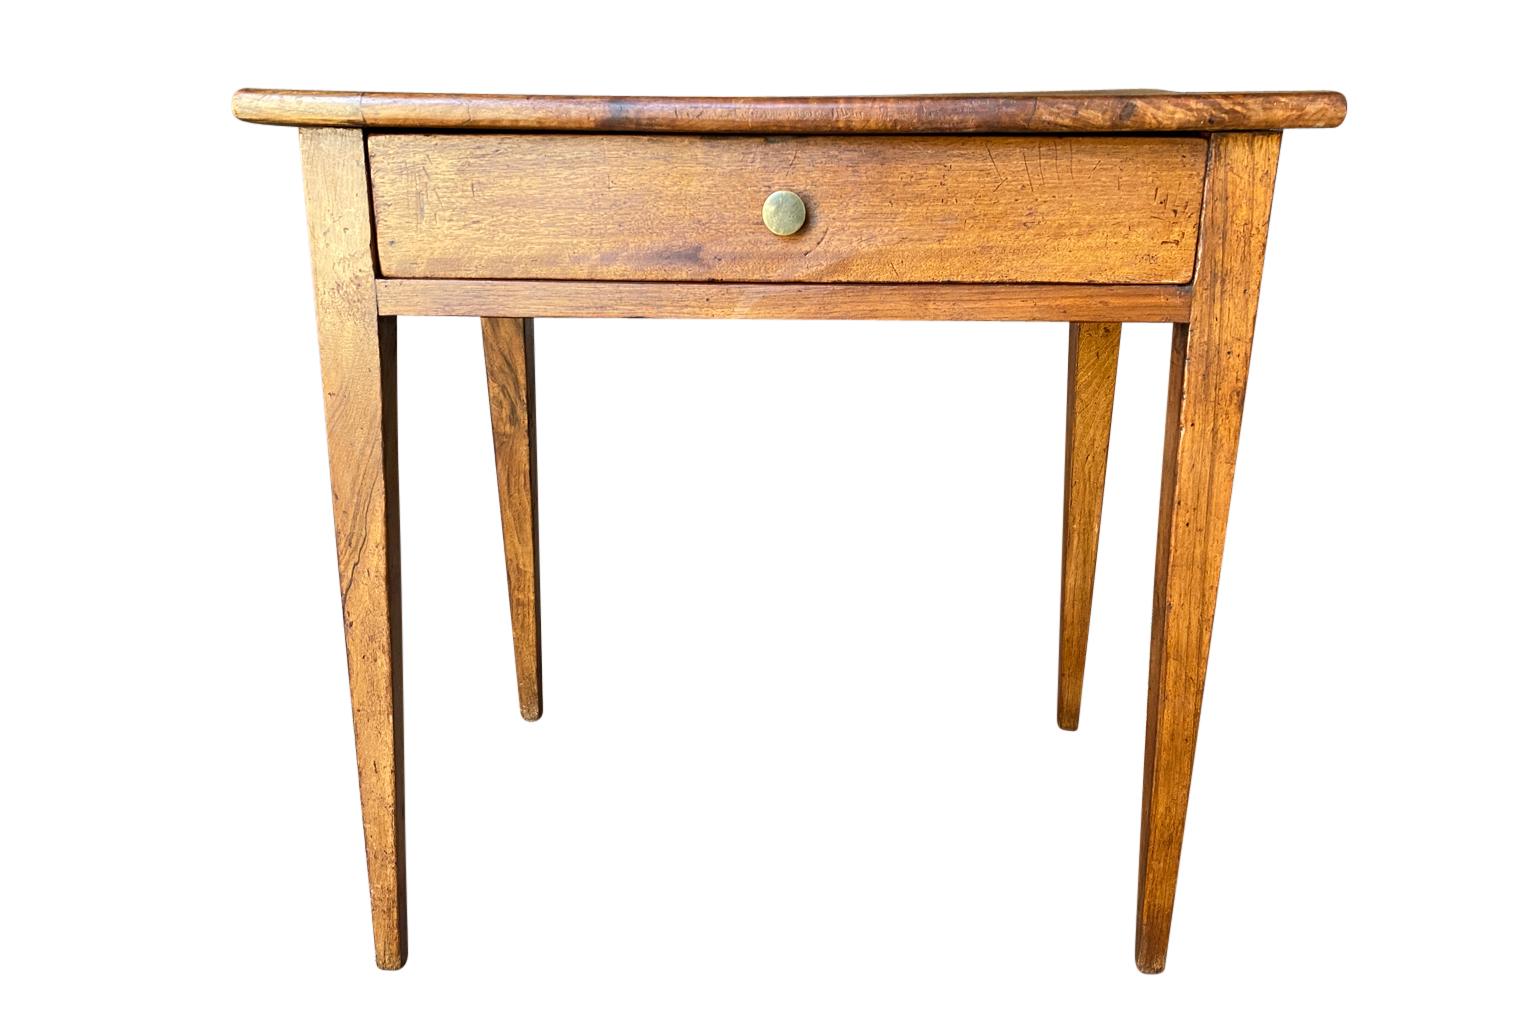 A 19th century Directoire style side table from the South of France. Soundly constructed from walnut with a single drawer and tapered legs.